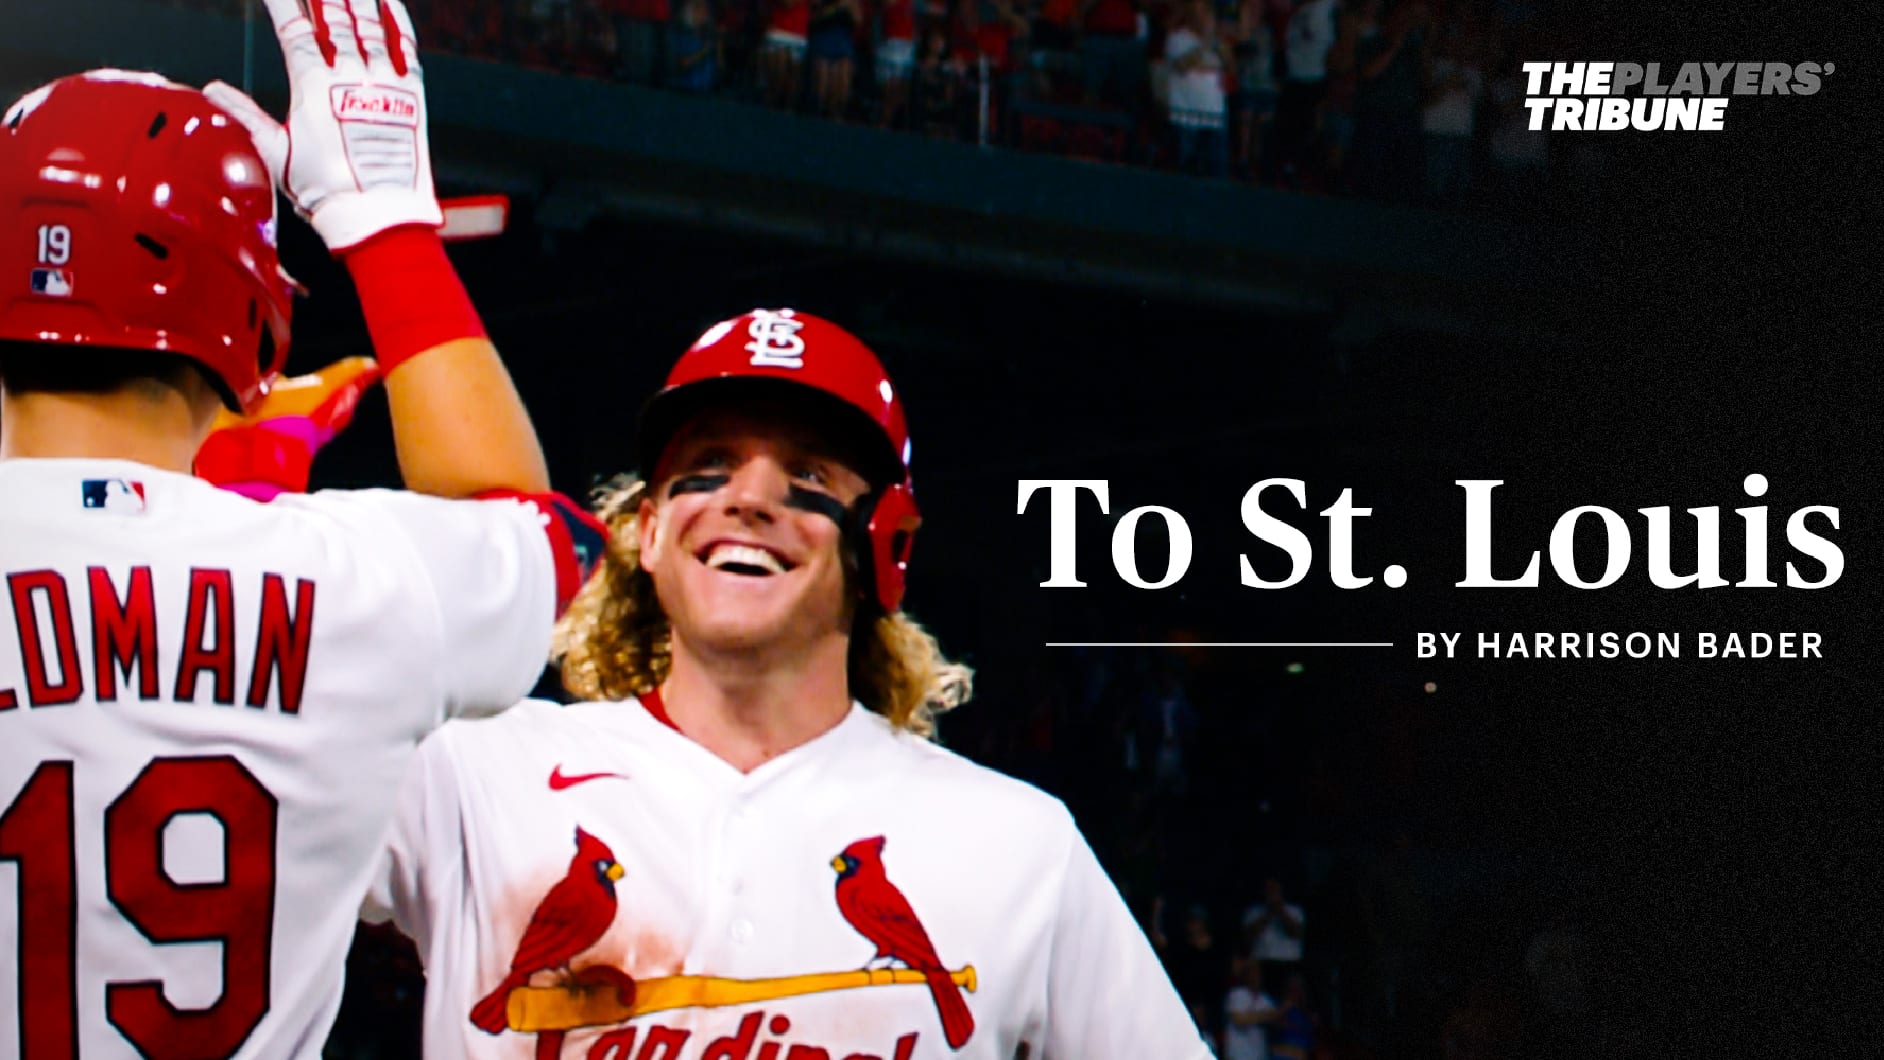 To St. Louis by Harrison Bader | The Players' Tribune